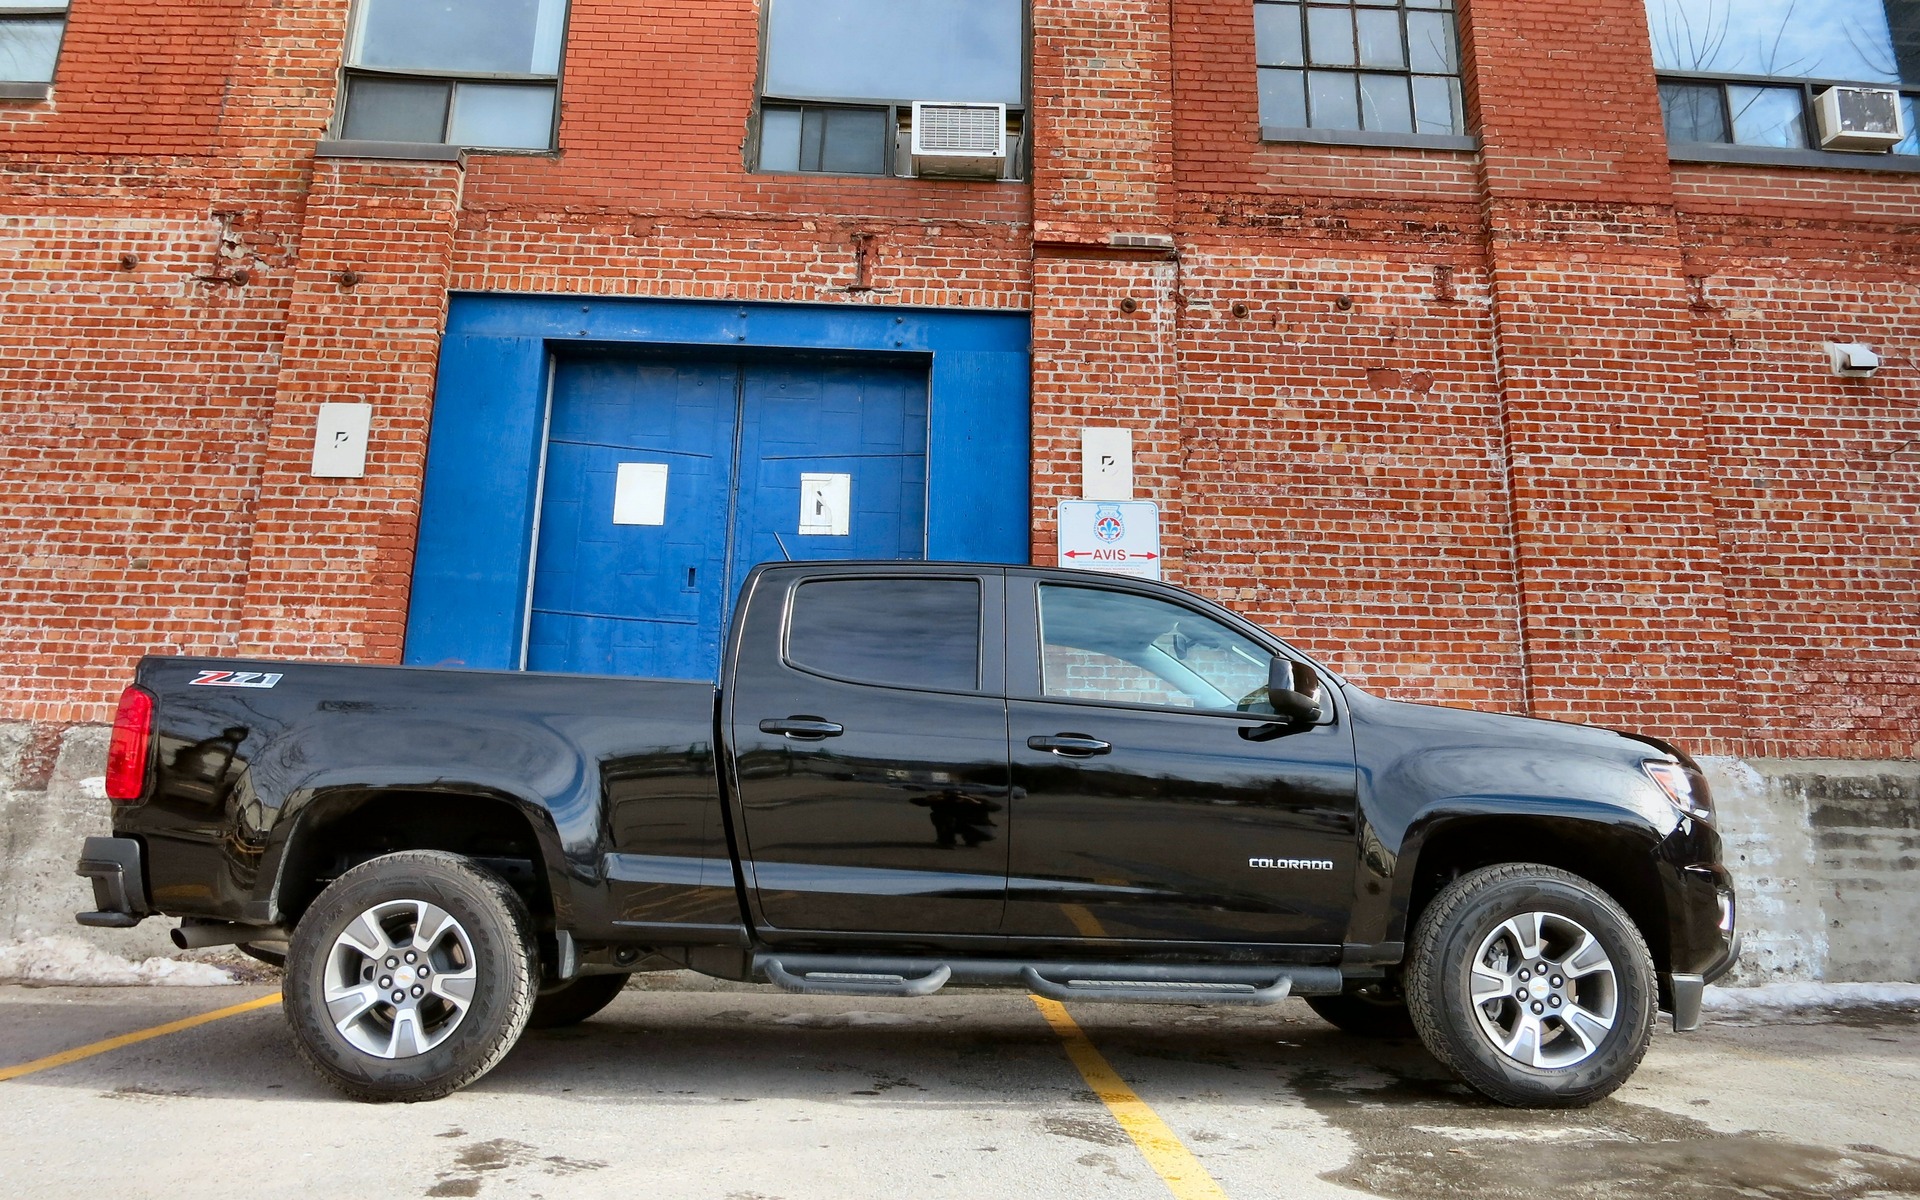 I drove the Chevrolet back-to-back with the also-new Ford F-150.